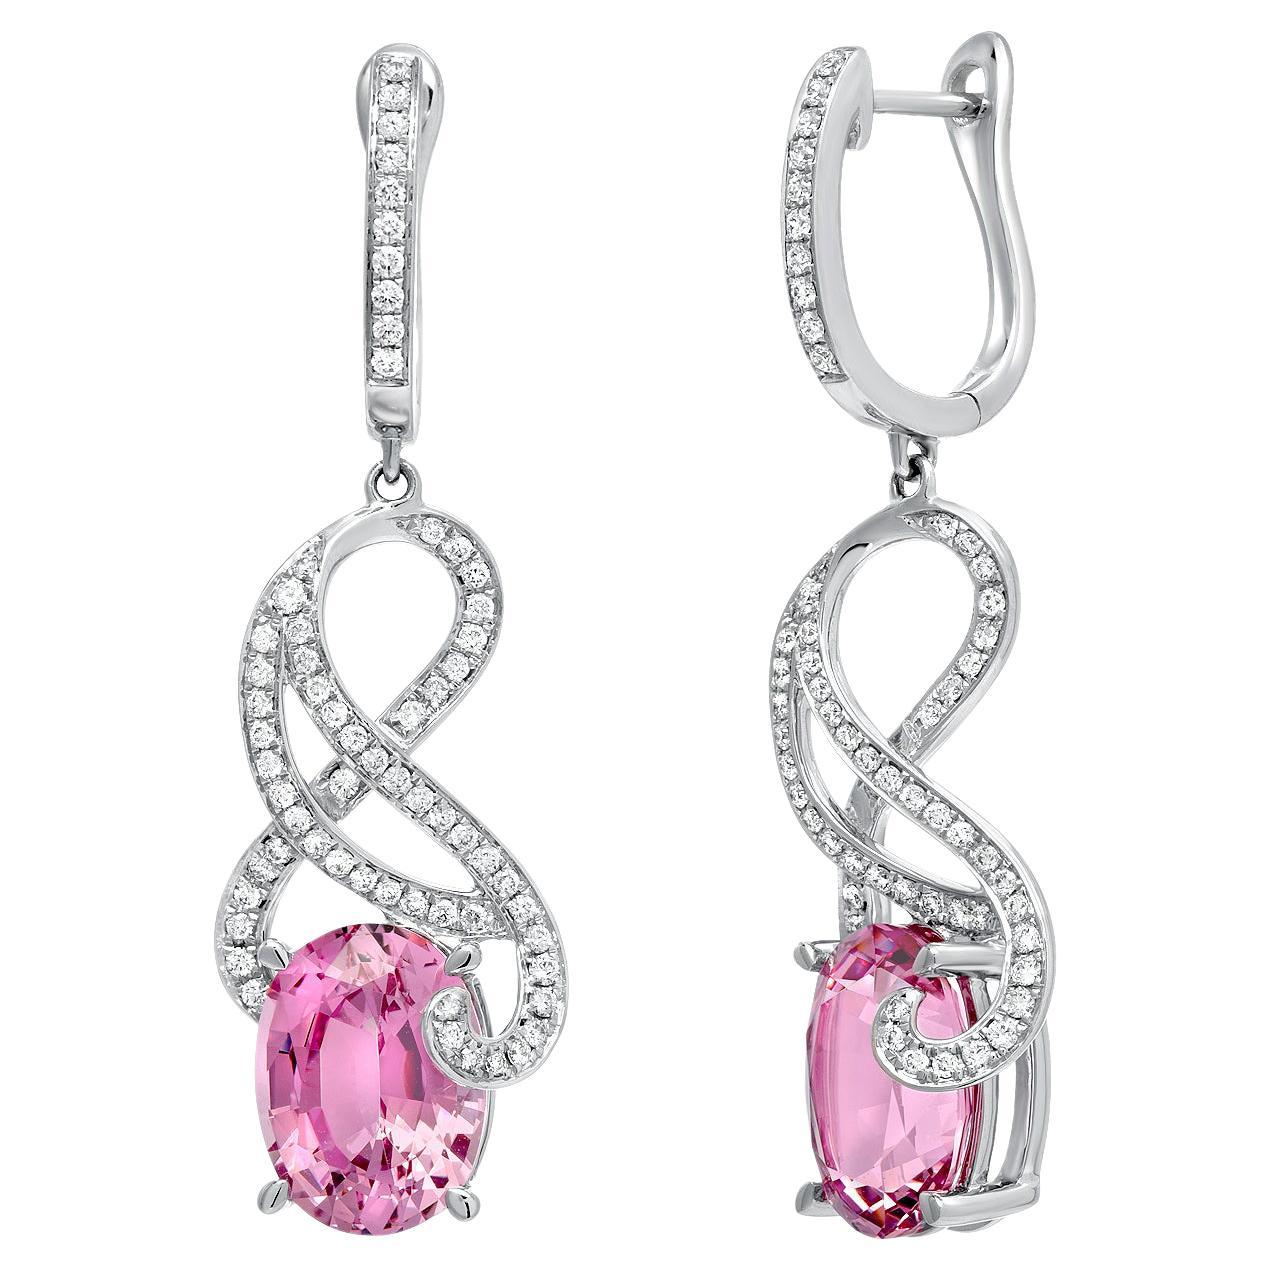 Pink Spinel Earrings 7.00 Carats Ovals For Sale